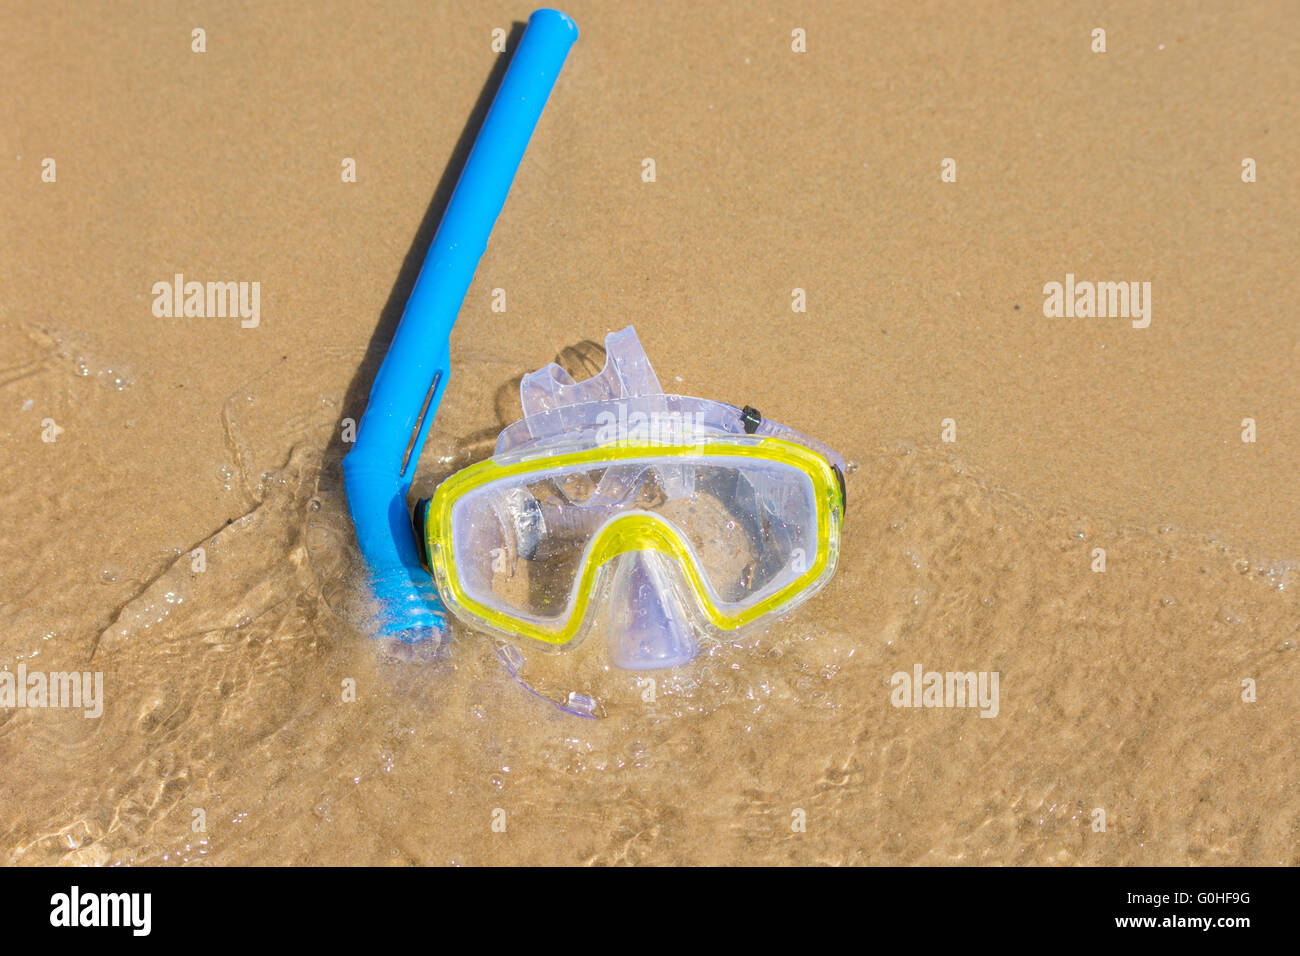 The swimming mask and snorkel to breathe under water, lie on the sand at the waters edge Stock Photo